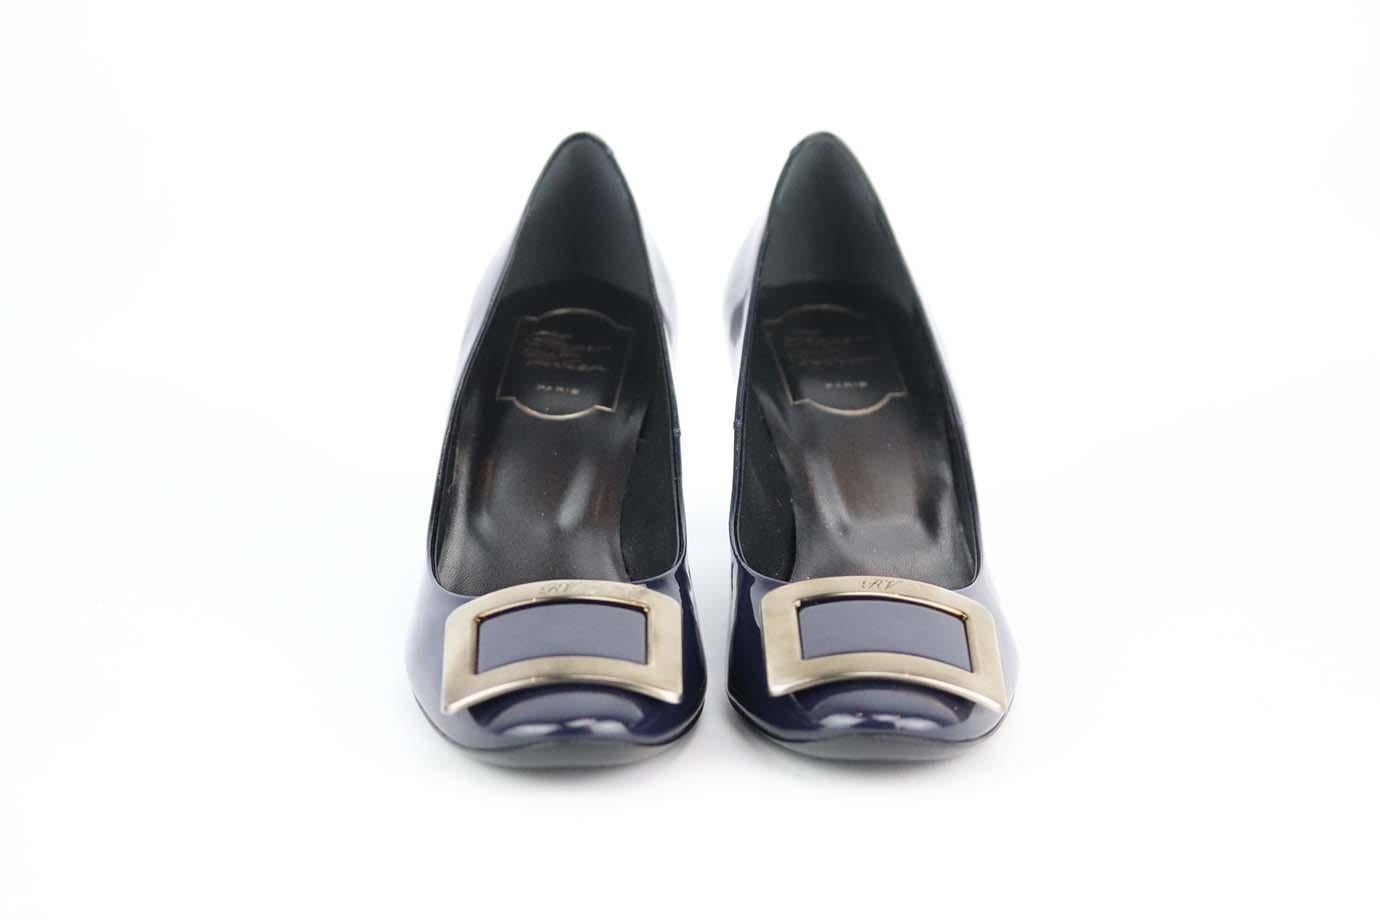 These pumps by Roger Vivier are an elegant re-creation of the founder's original 1965 design, they're made from navy patent-leather and embellished with a silver-tone signature buckle that tops the rounded toe. Heel measures approximately 50 mm/ 2